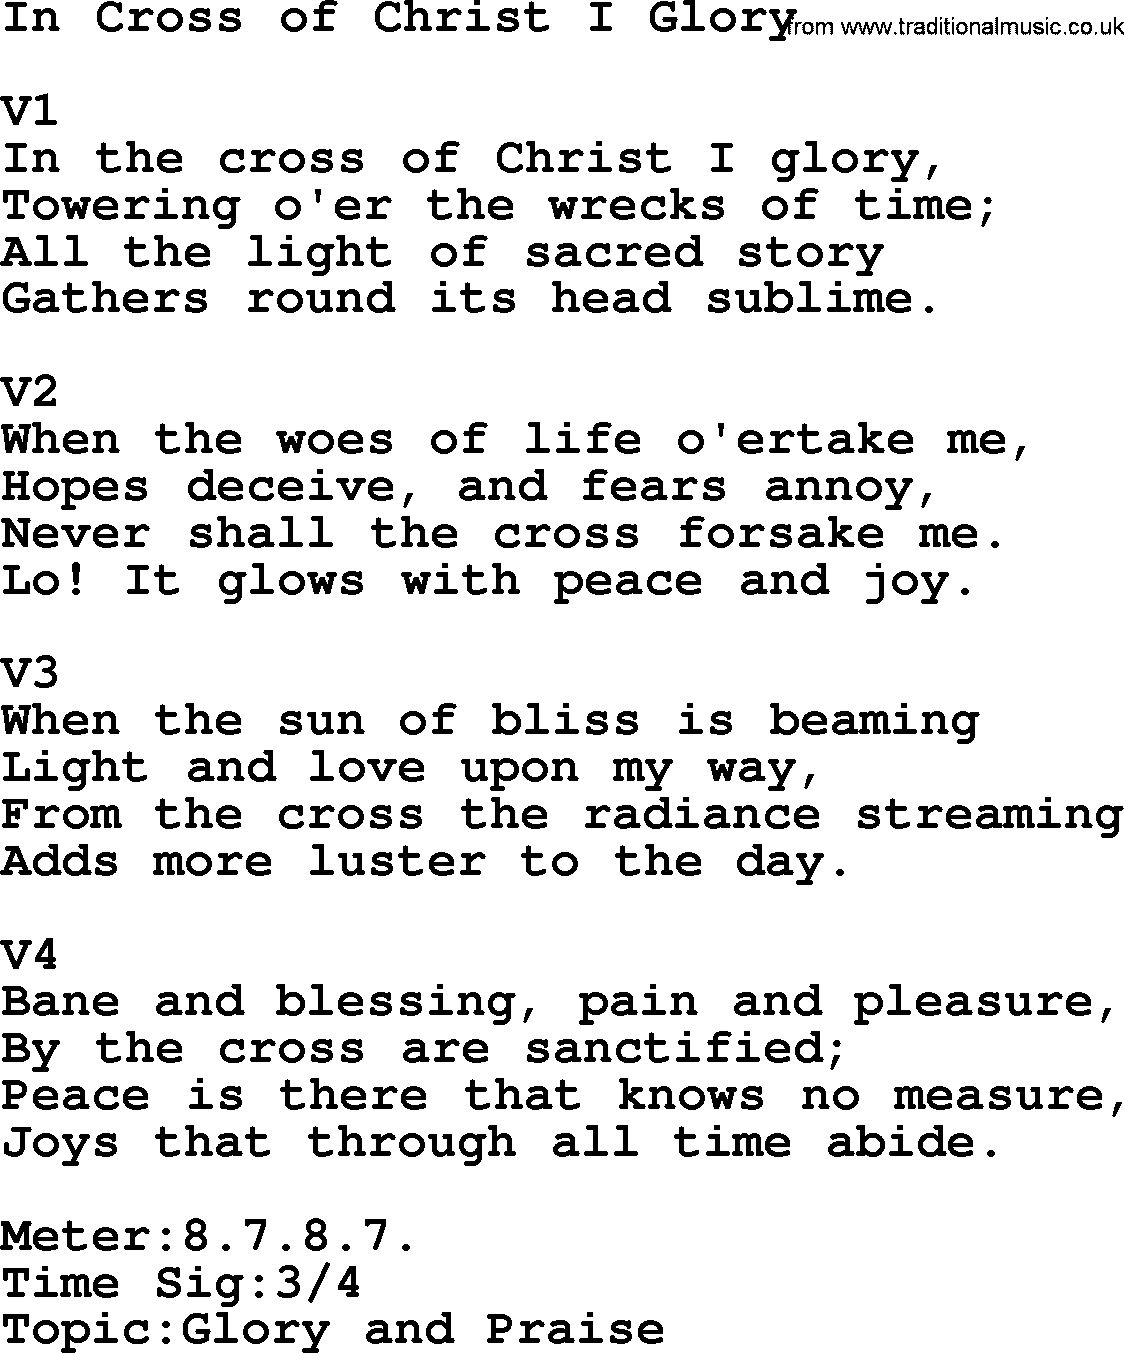 Adventist Hynms collection, Hymn: In Cross Of Christ I Glory, lyrics with PDF